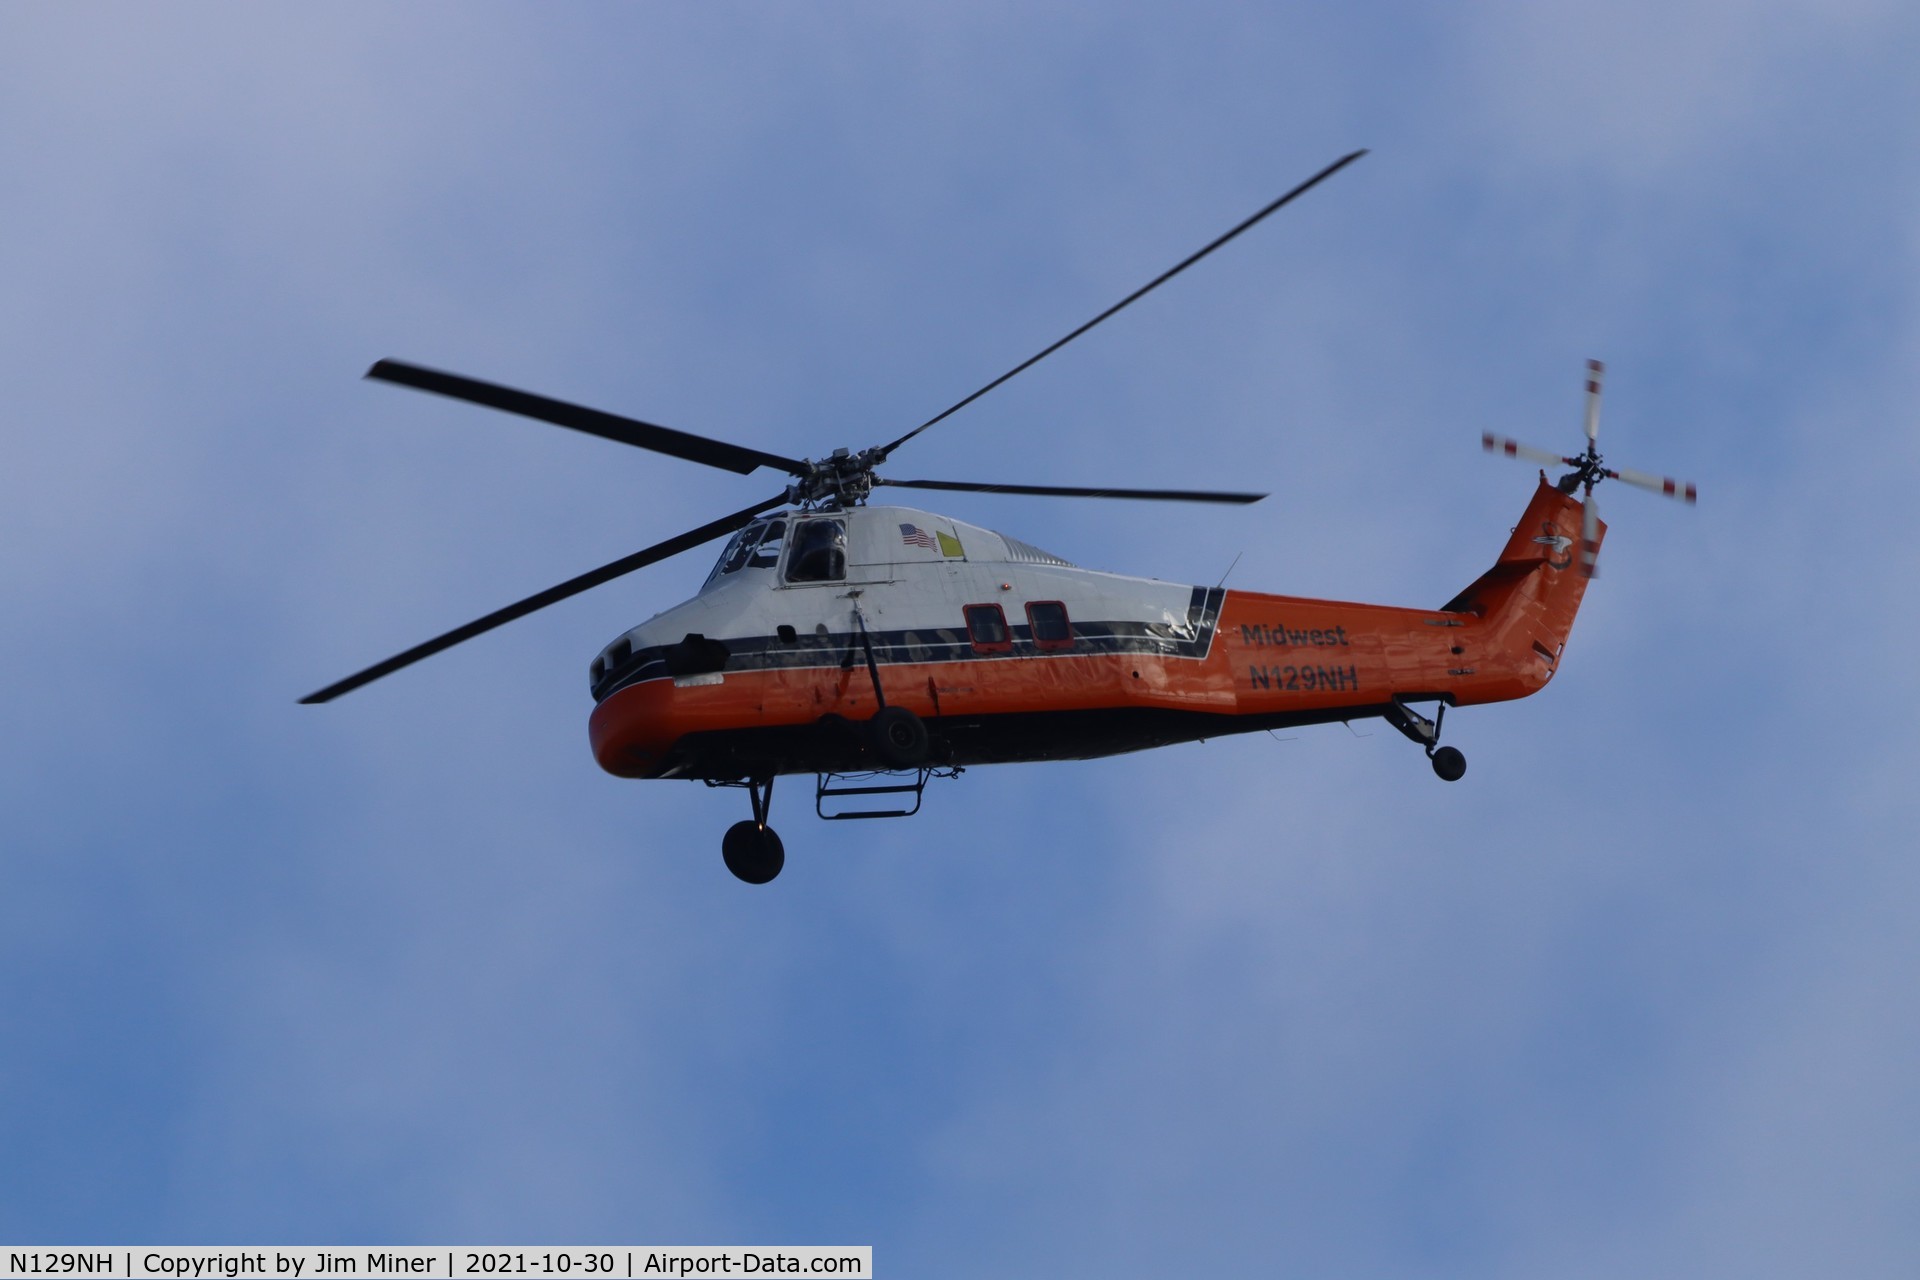 N129NH, 1975 Sikorsky S-58JT C/N 58-855, Flying over Sleepy Hollow, IL.